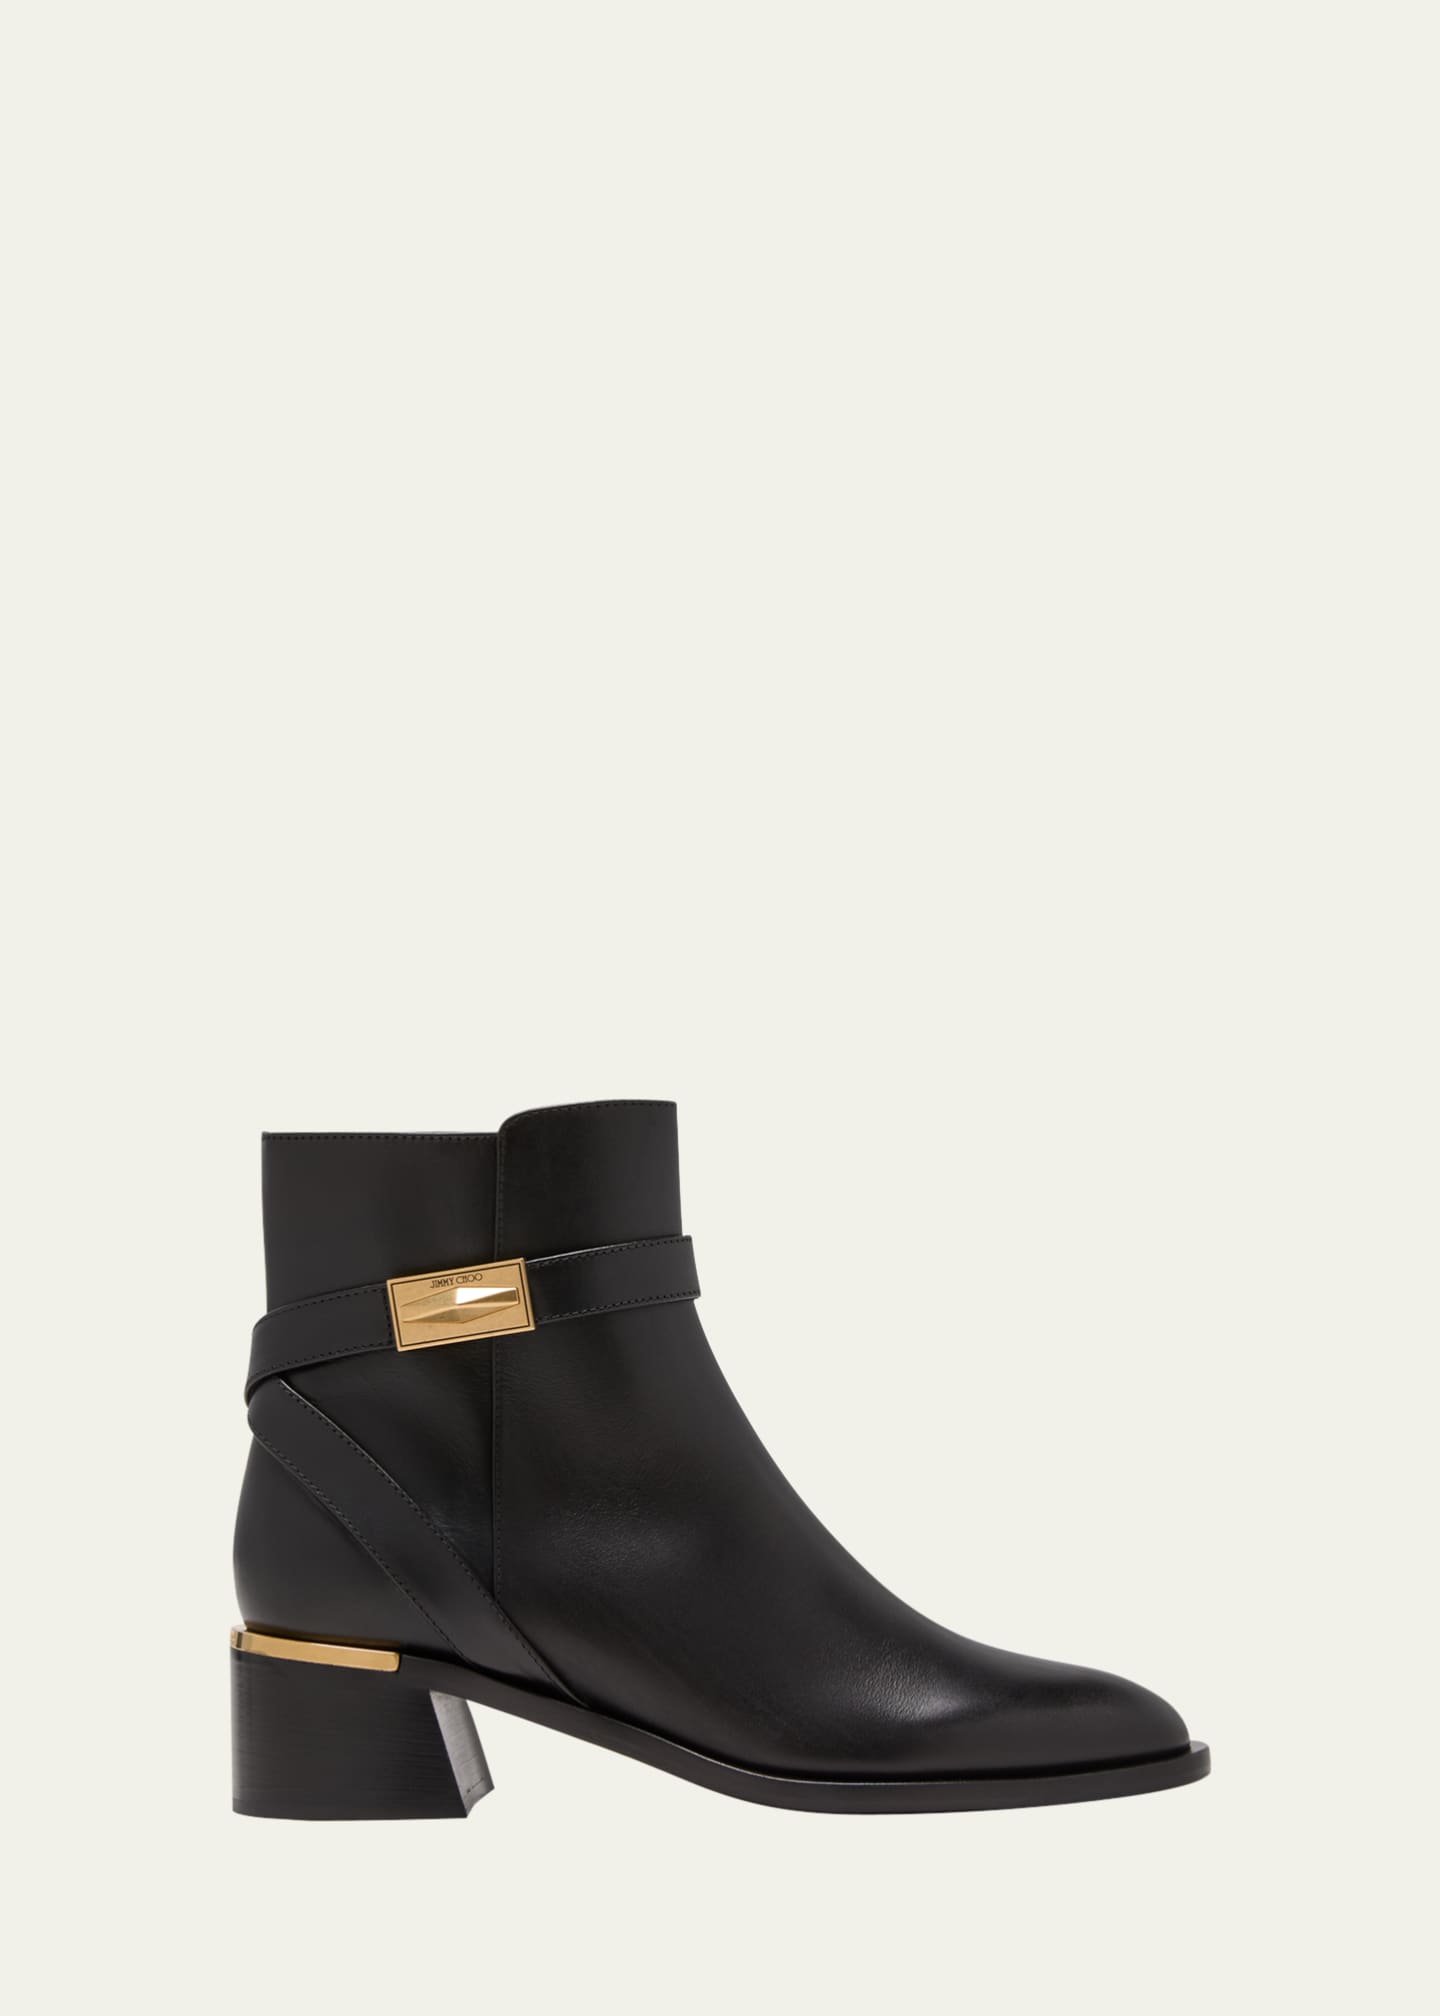 Jimmy Choo Diantha Leather Buckle Ankle Booties - Bergdorf Goodman